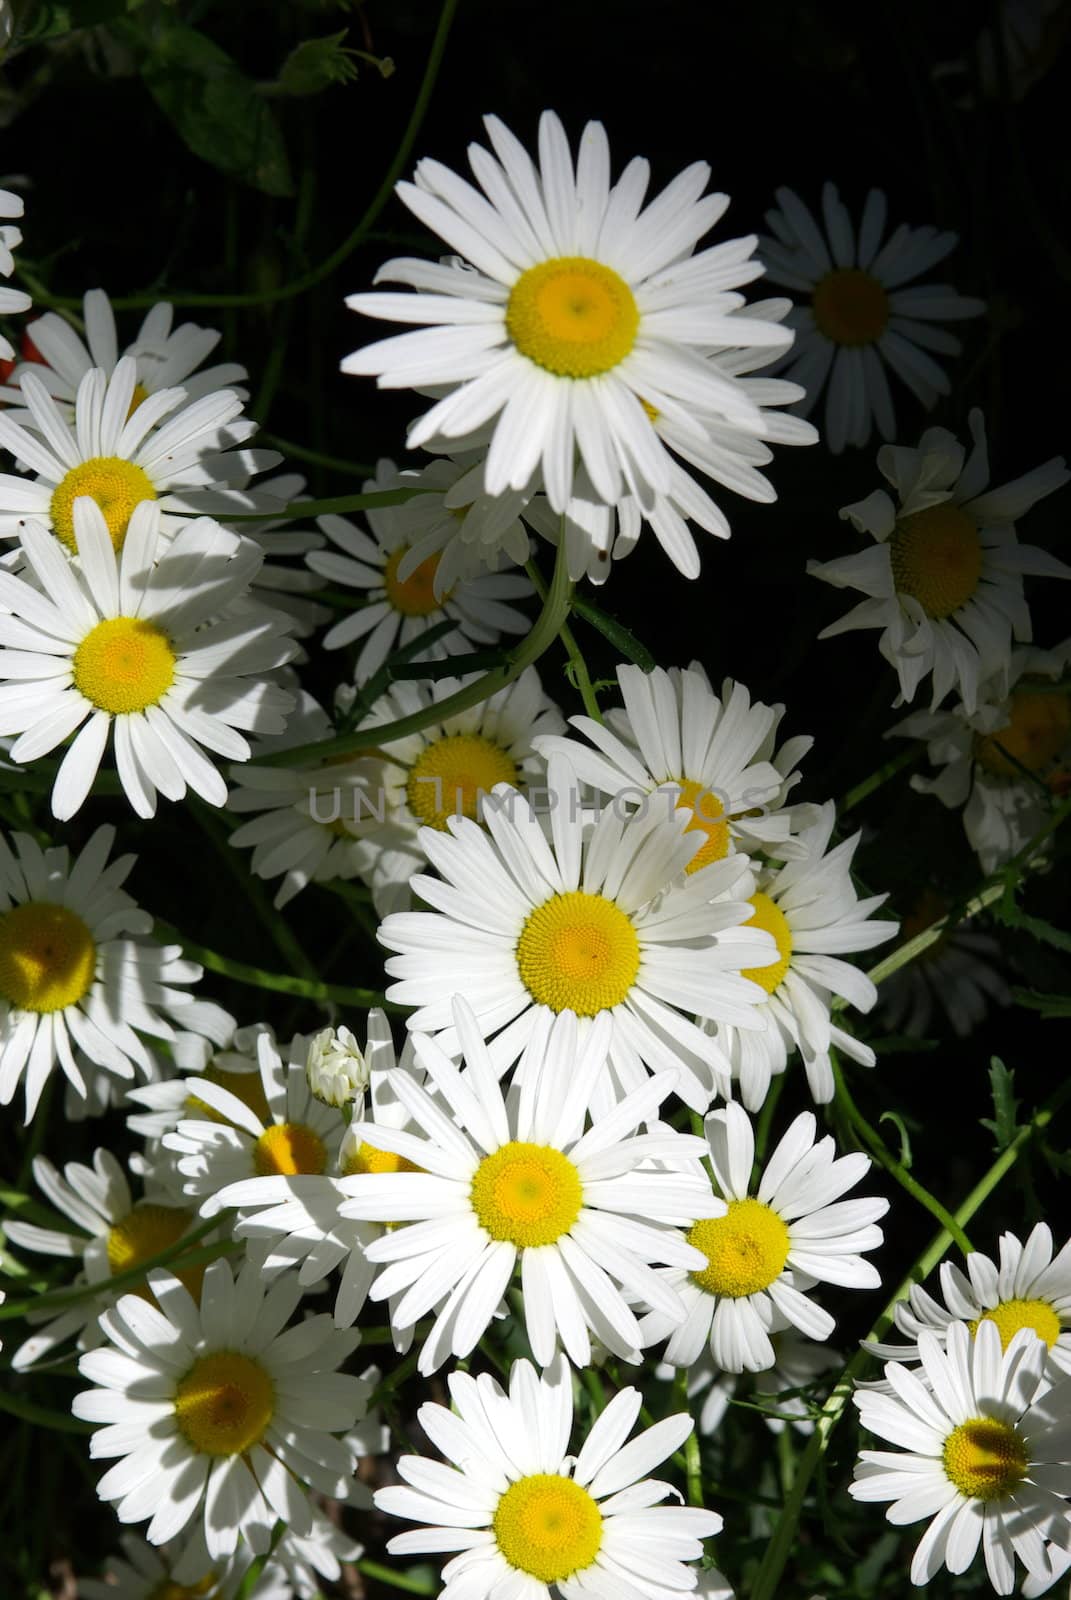 Wild mountain daisies growing in a sunny area in the forest.